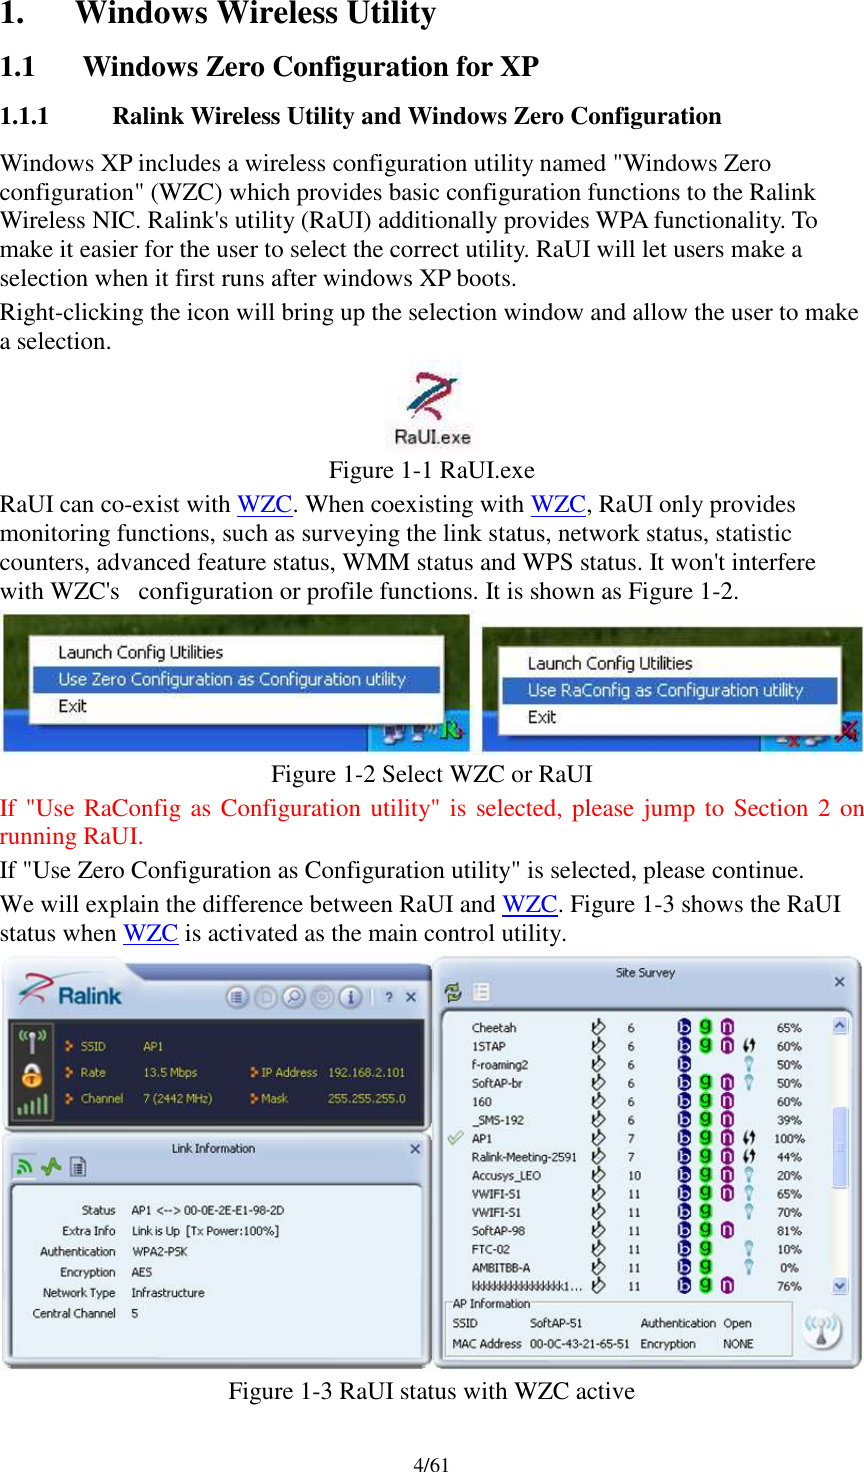 4/611. Windows Wireless Utility1.1 Windows Zero Configuration for XP1.1.1 Ralink Wireless Utility and Windows Zero ConfigurationWindows XP includes a wireless configuration utility named &quot;Windows Zeroconfiguration&quot; (WZC) which provides basic configuration functions to the RalinkWireless NIC. Ralink&apos;s utility (RaUI) additionally provides WPA functionality. Tomake it easier for the user to select the correct utility. RaUI will let users make aselection when it first runs after windows XP boots.Right-clicking the icon will bring up the selection window and allow the user to makea selection.Figure 1-1 RaUI.exeRaUI can co-exist with WZC. When coexisting with WZC, RaUI only providesmonitoring functions, such as surveying the link status, network status, statisticcounters, advanced feature status, WMM status and WPS status. It won&apos;t interferewith WZC&apos;s configuration or profile functions. It is shown as Figure 1-2.Figure 1-2 Select WZC or RaUIIf &quot;Use RaConfig as Configuration utility&quot; is selected, please jump to Section 2 onrunning RaUI.If &quot;Use Zero Configuration as Configuration utility&quot; is selected, please continue.We will explain the difference between RaUI and WZC. Figure 1-3 shows the RaUIstatus when WZC is activated as the main control utility.Figure 1-3 RaUI status with WZC active